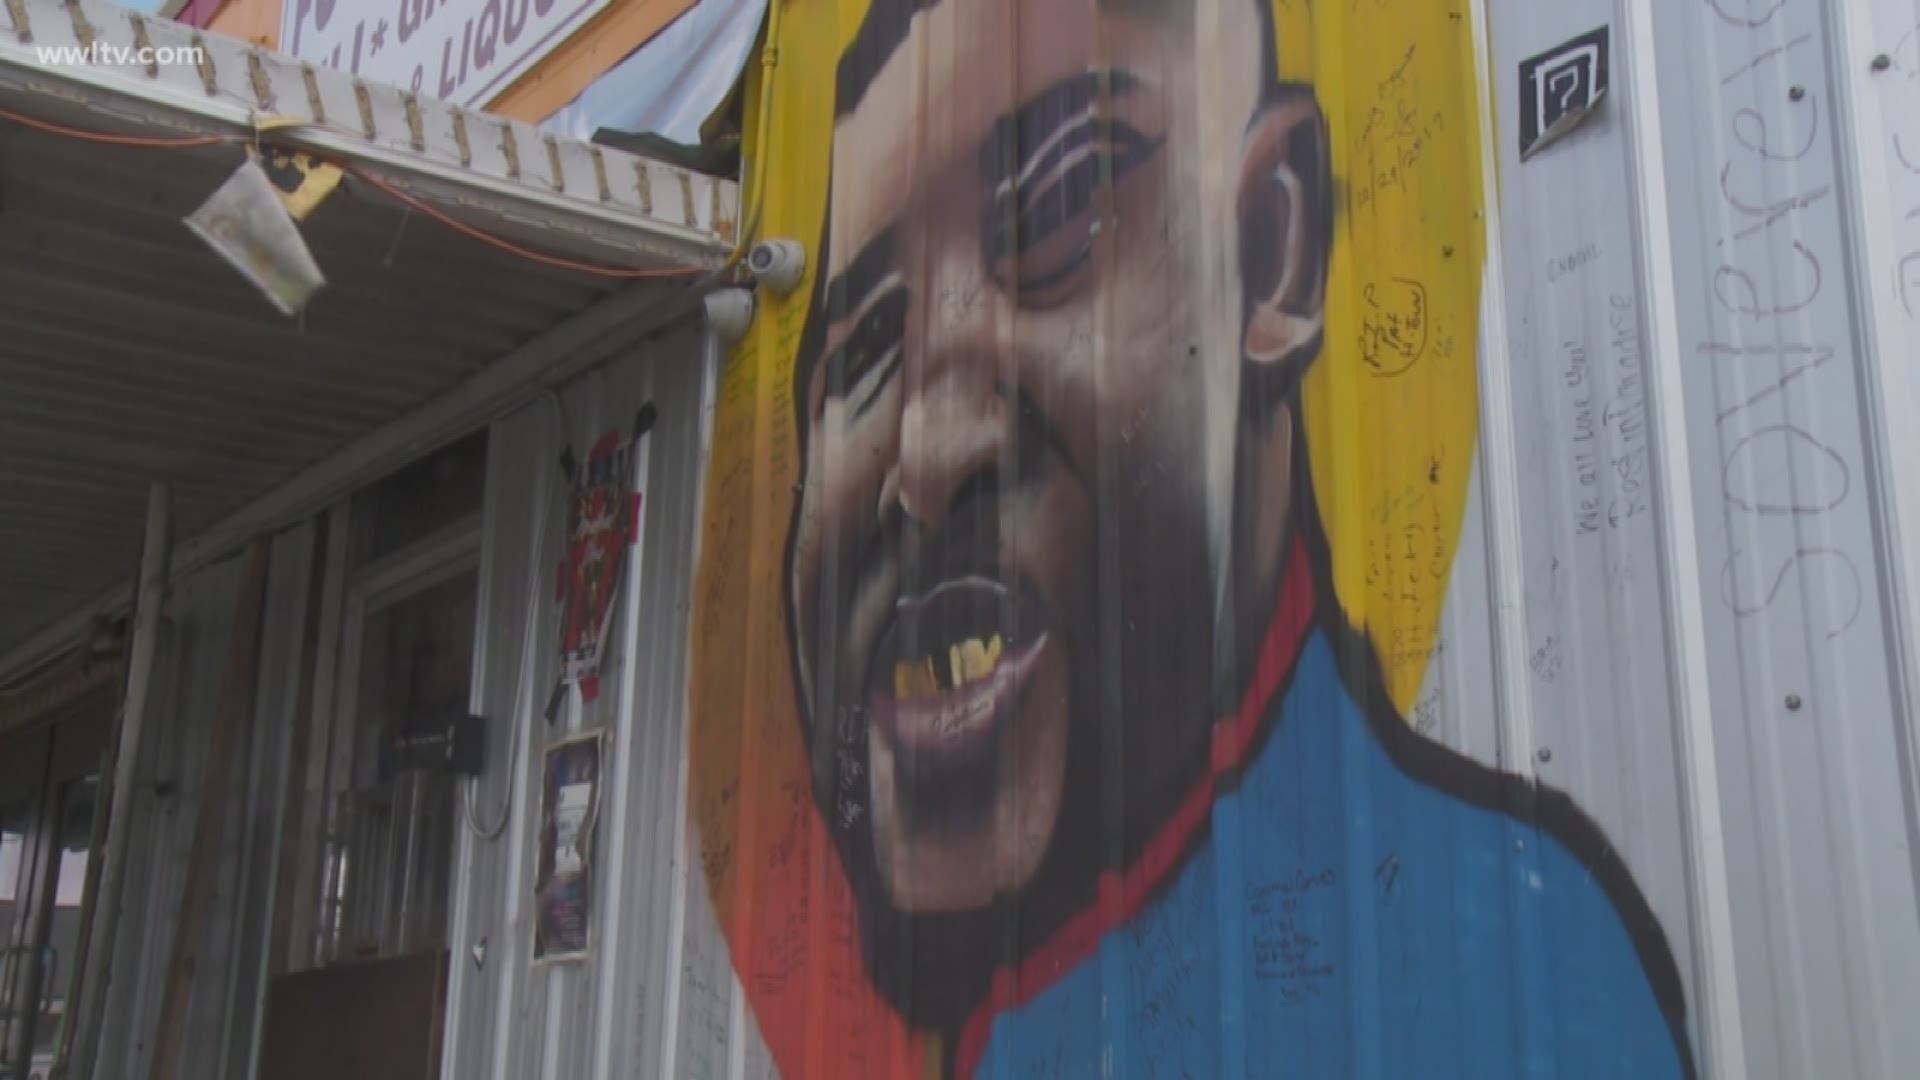 Sterling was fatally shot outside of the Triple S Food Mart during a struggle with the officers, which touched off weeks of unrest in the city and clashes between protesters and police.